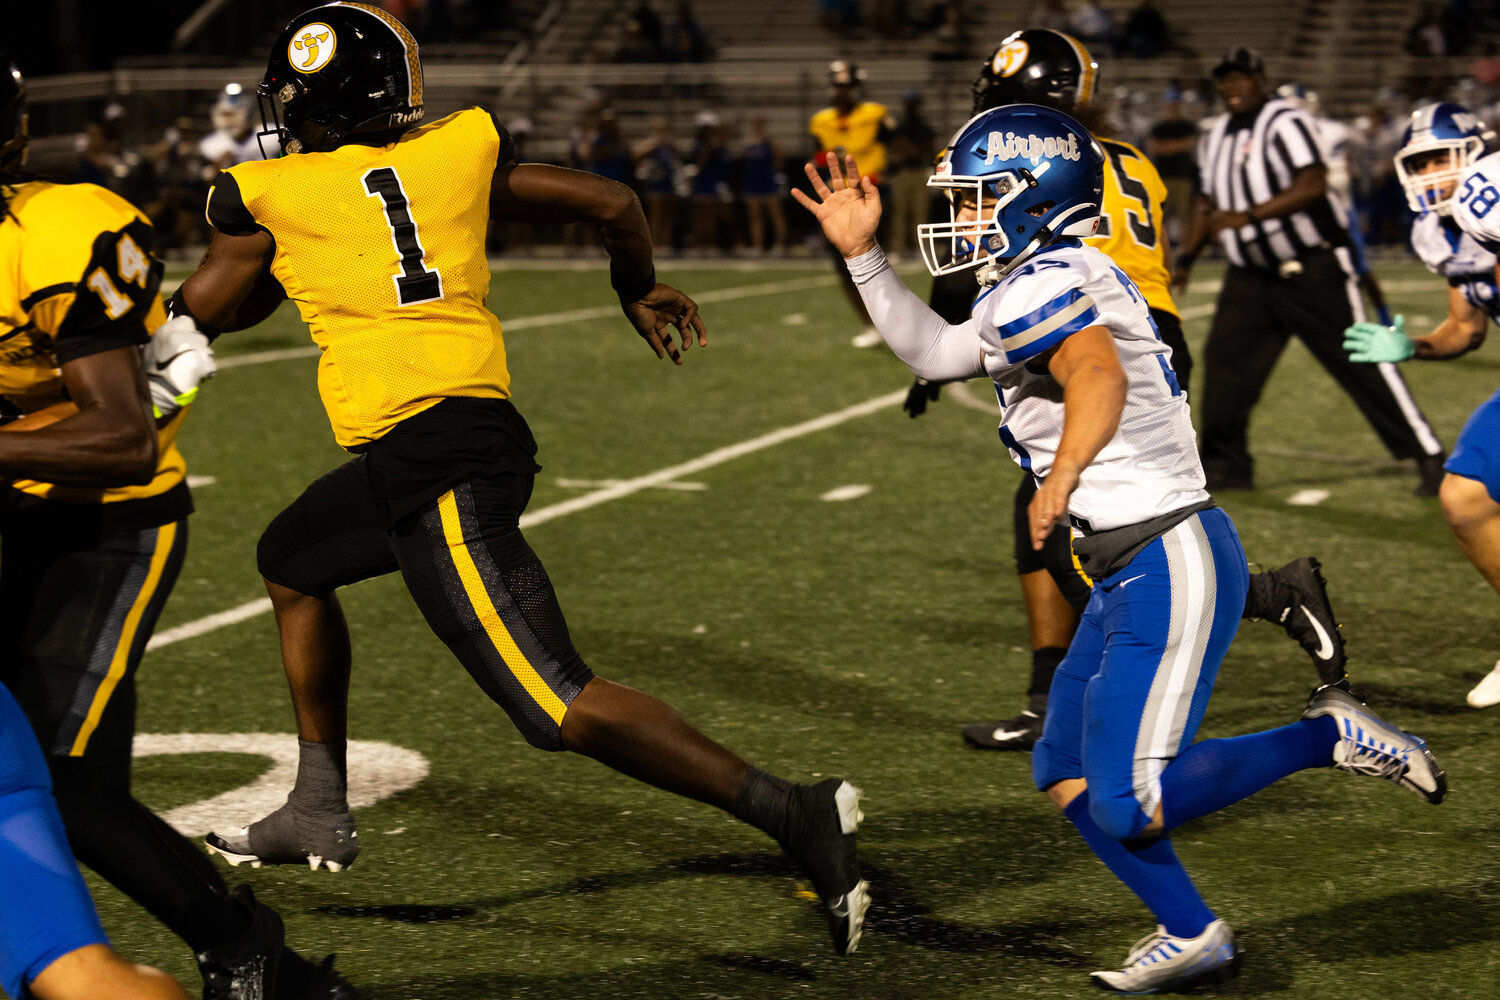 Irmo quarterback Aaron Brand carries the ball down the field during the first quarter against the Eagles.